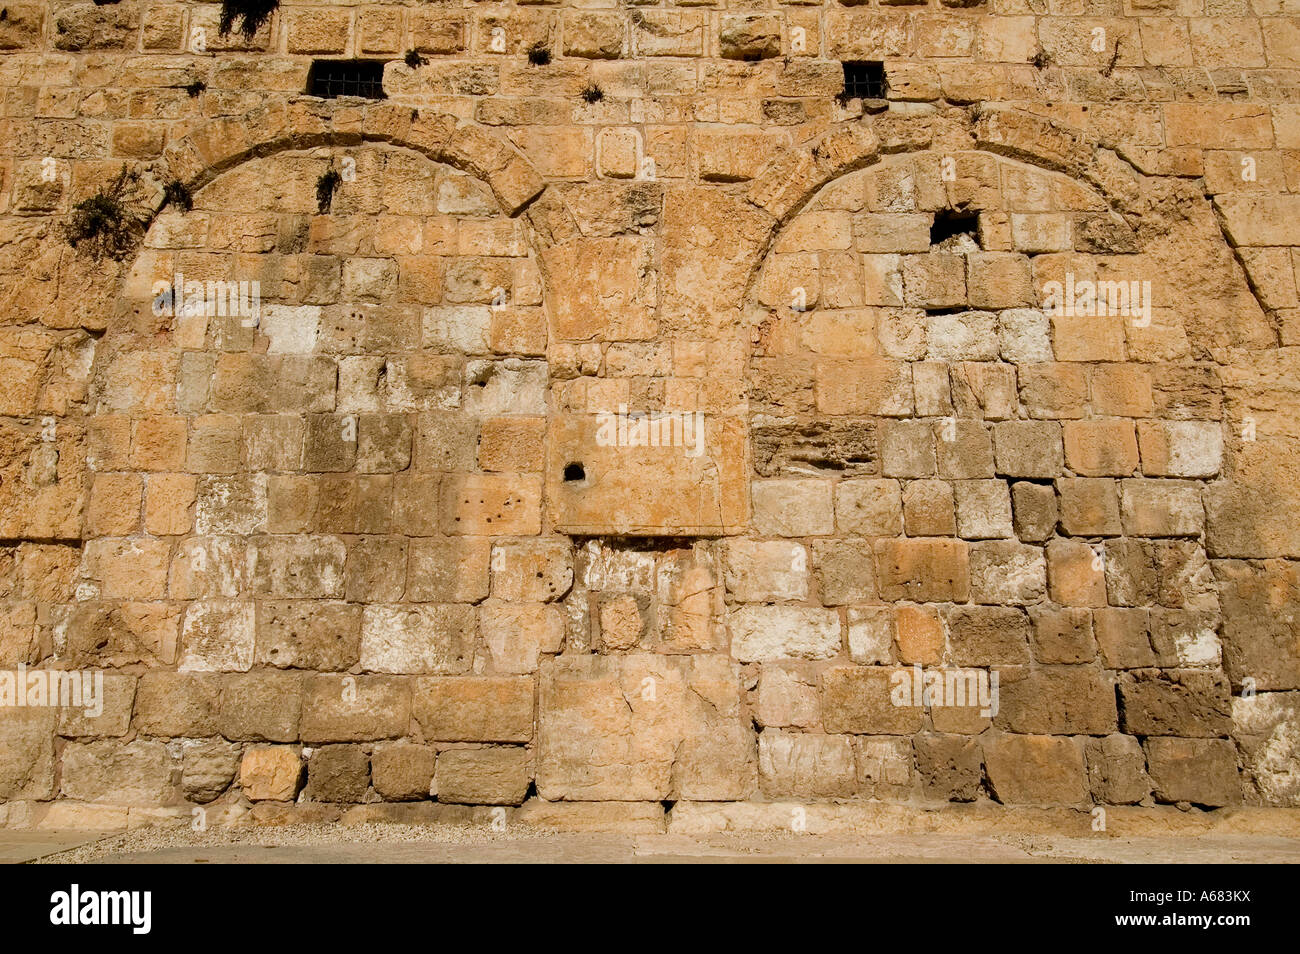 The now-blocked triple arched Huldah gate in the Southern Wall of the Temple Mount in the old city East Jerusalem Israel Stock Photo